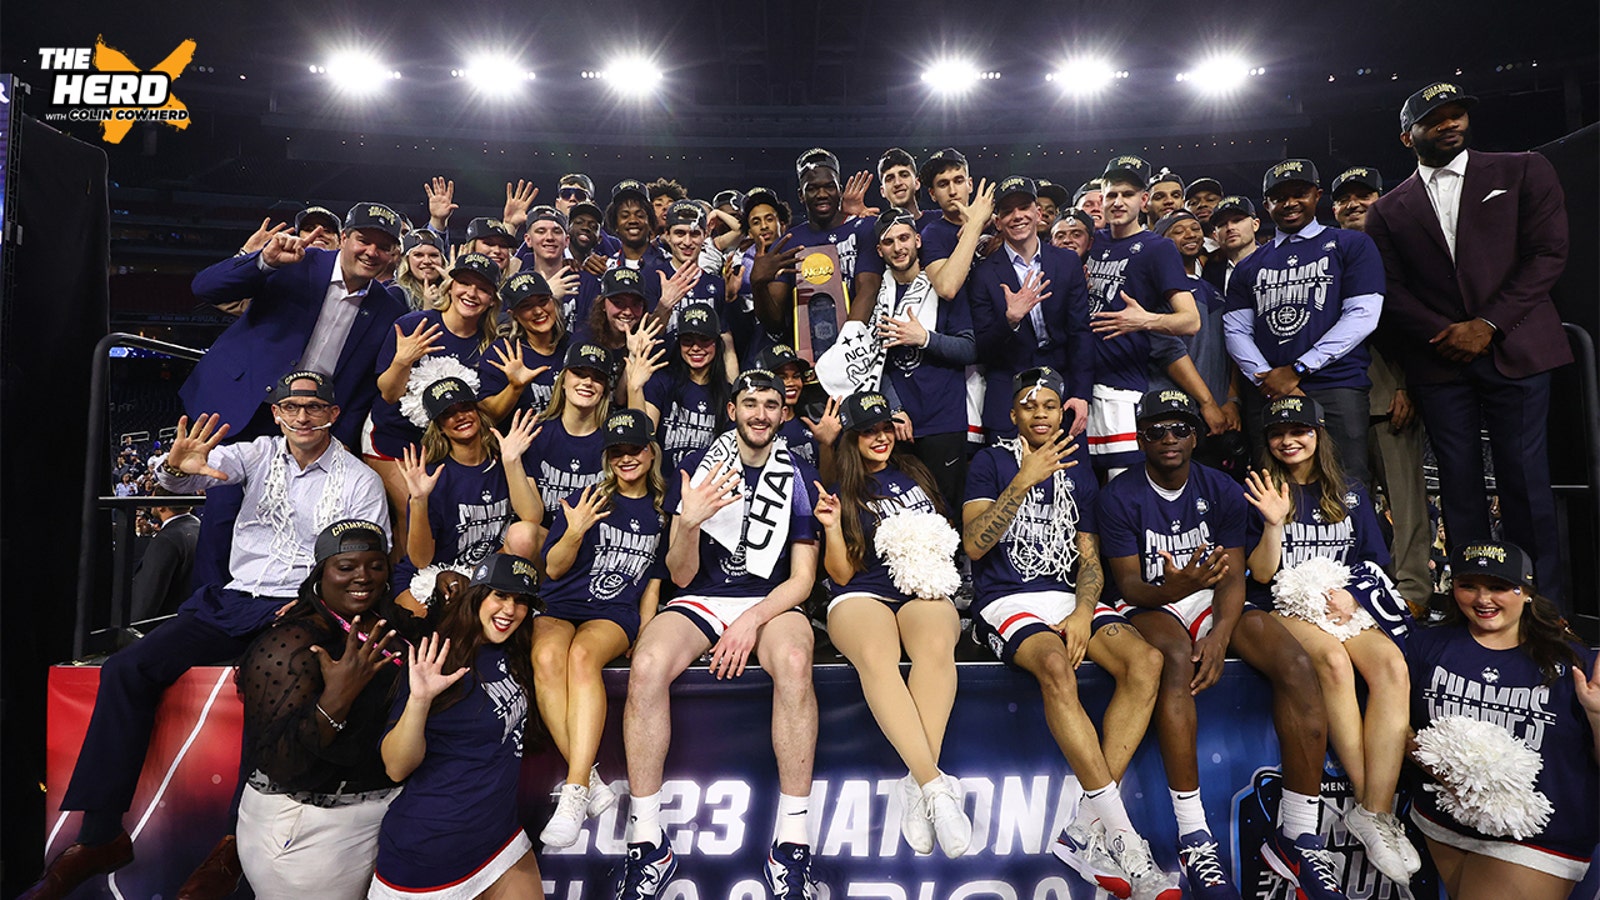 UConn dominated San Diego State for the program's fifth title in 24 years.